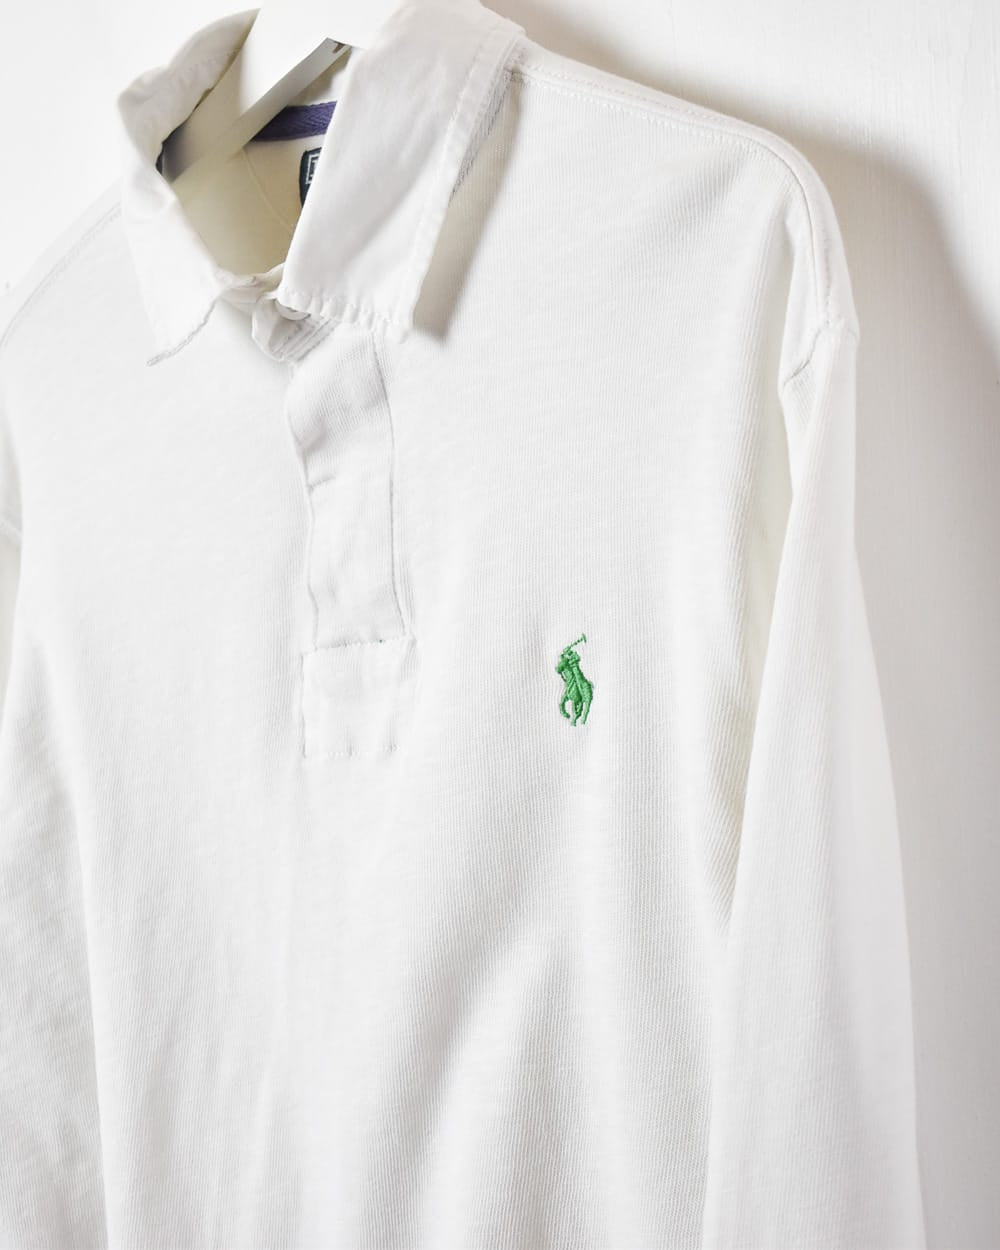 White Polo Ralph Lauren Rugby Shirt - X-Large